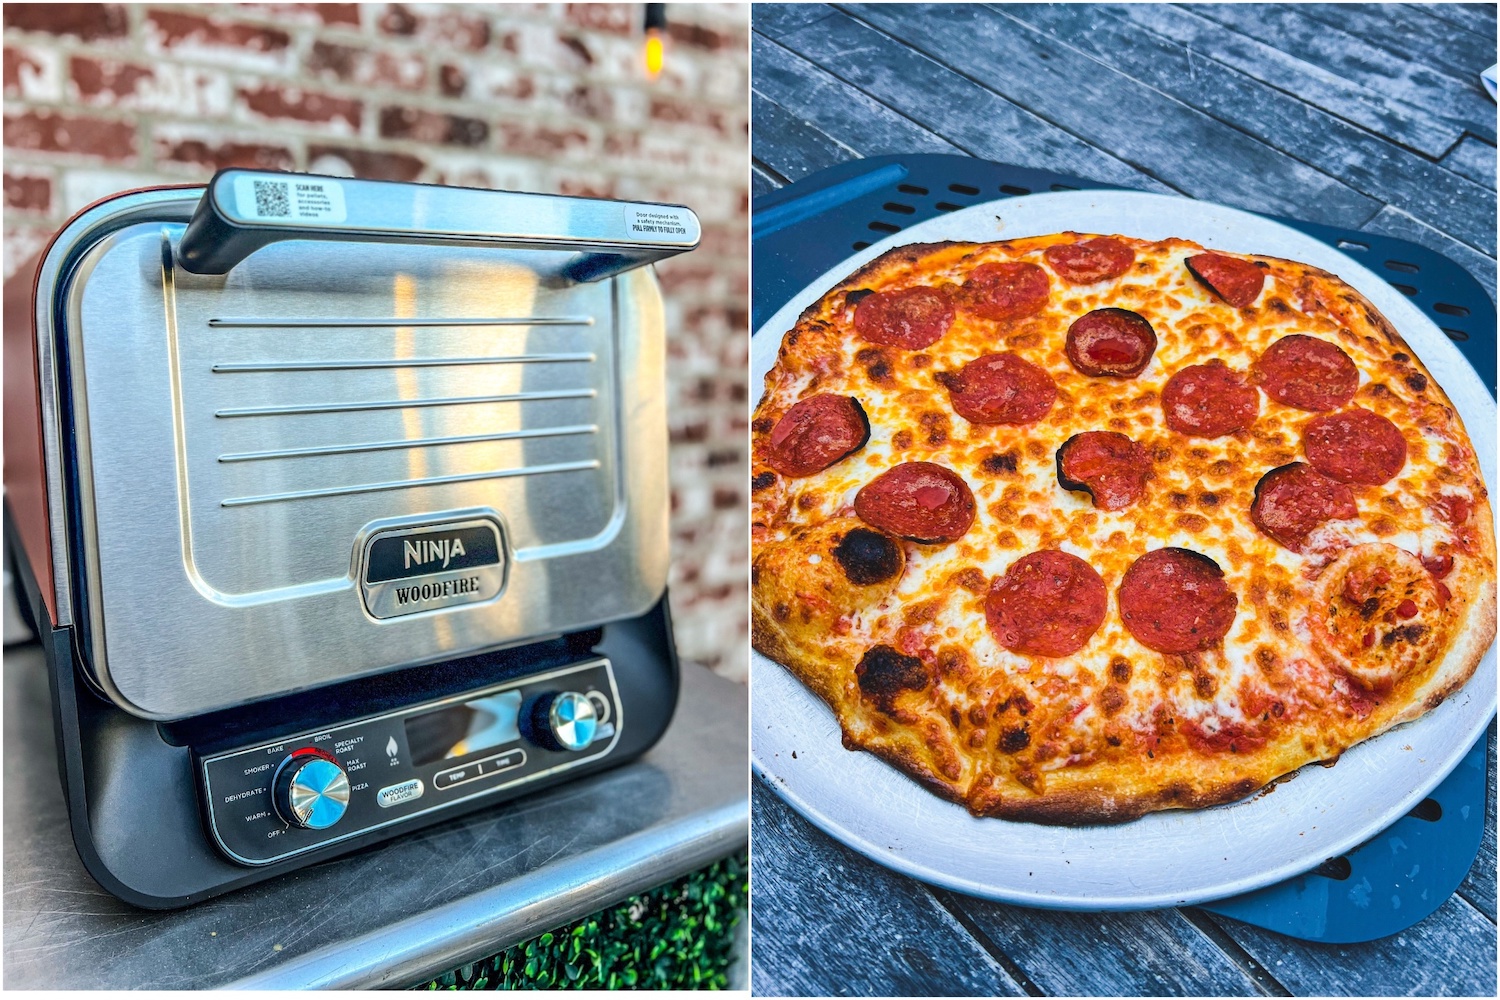 Wood Fired Pizza in 4 Minutes! / On The Ninja WoodFire Outdoor Grill /  Awesome! 